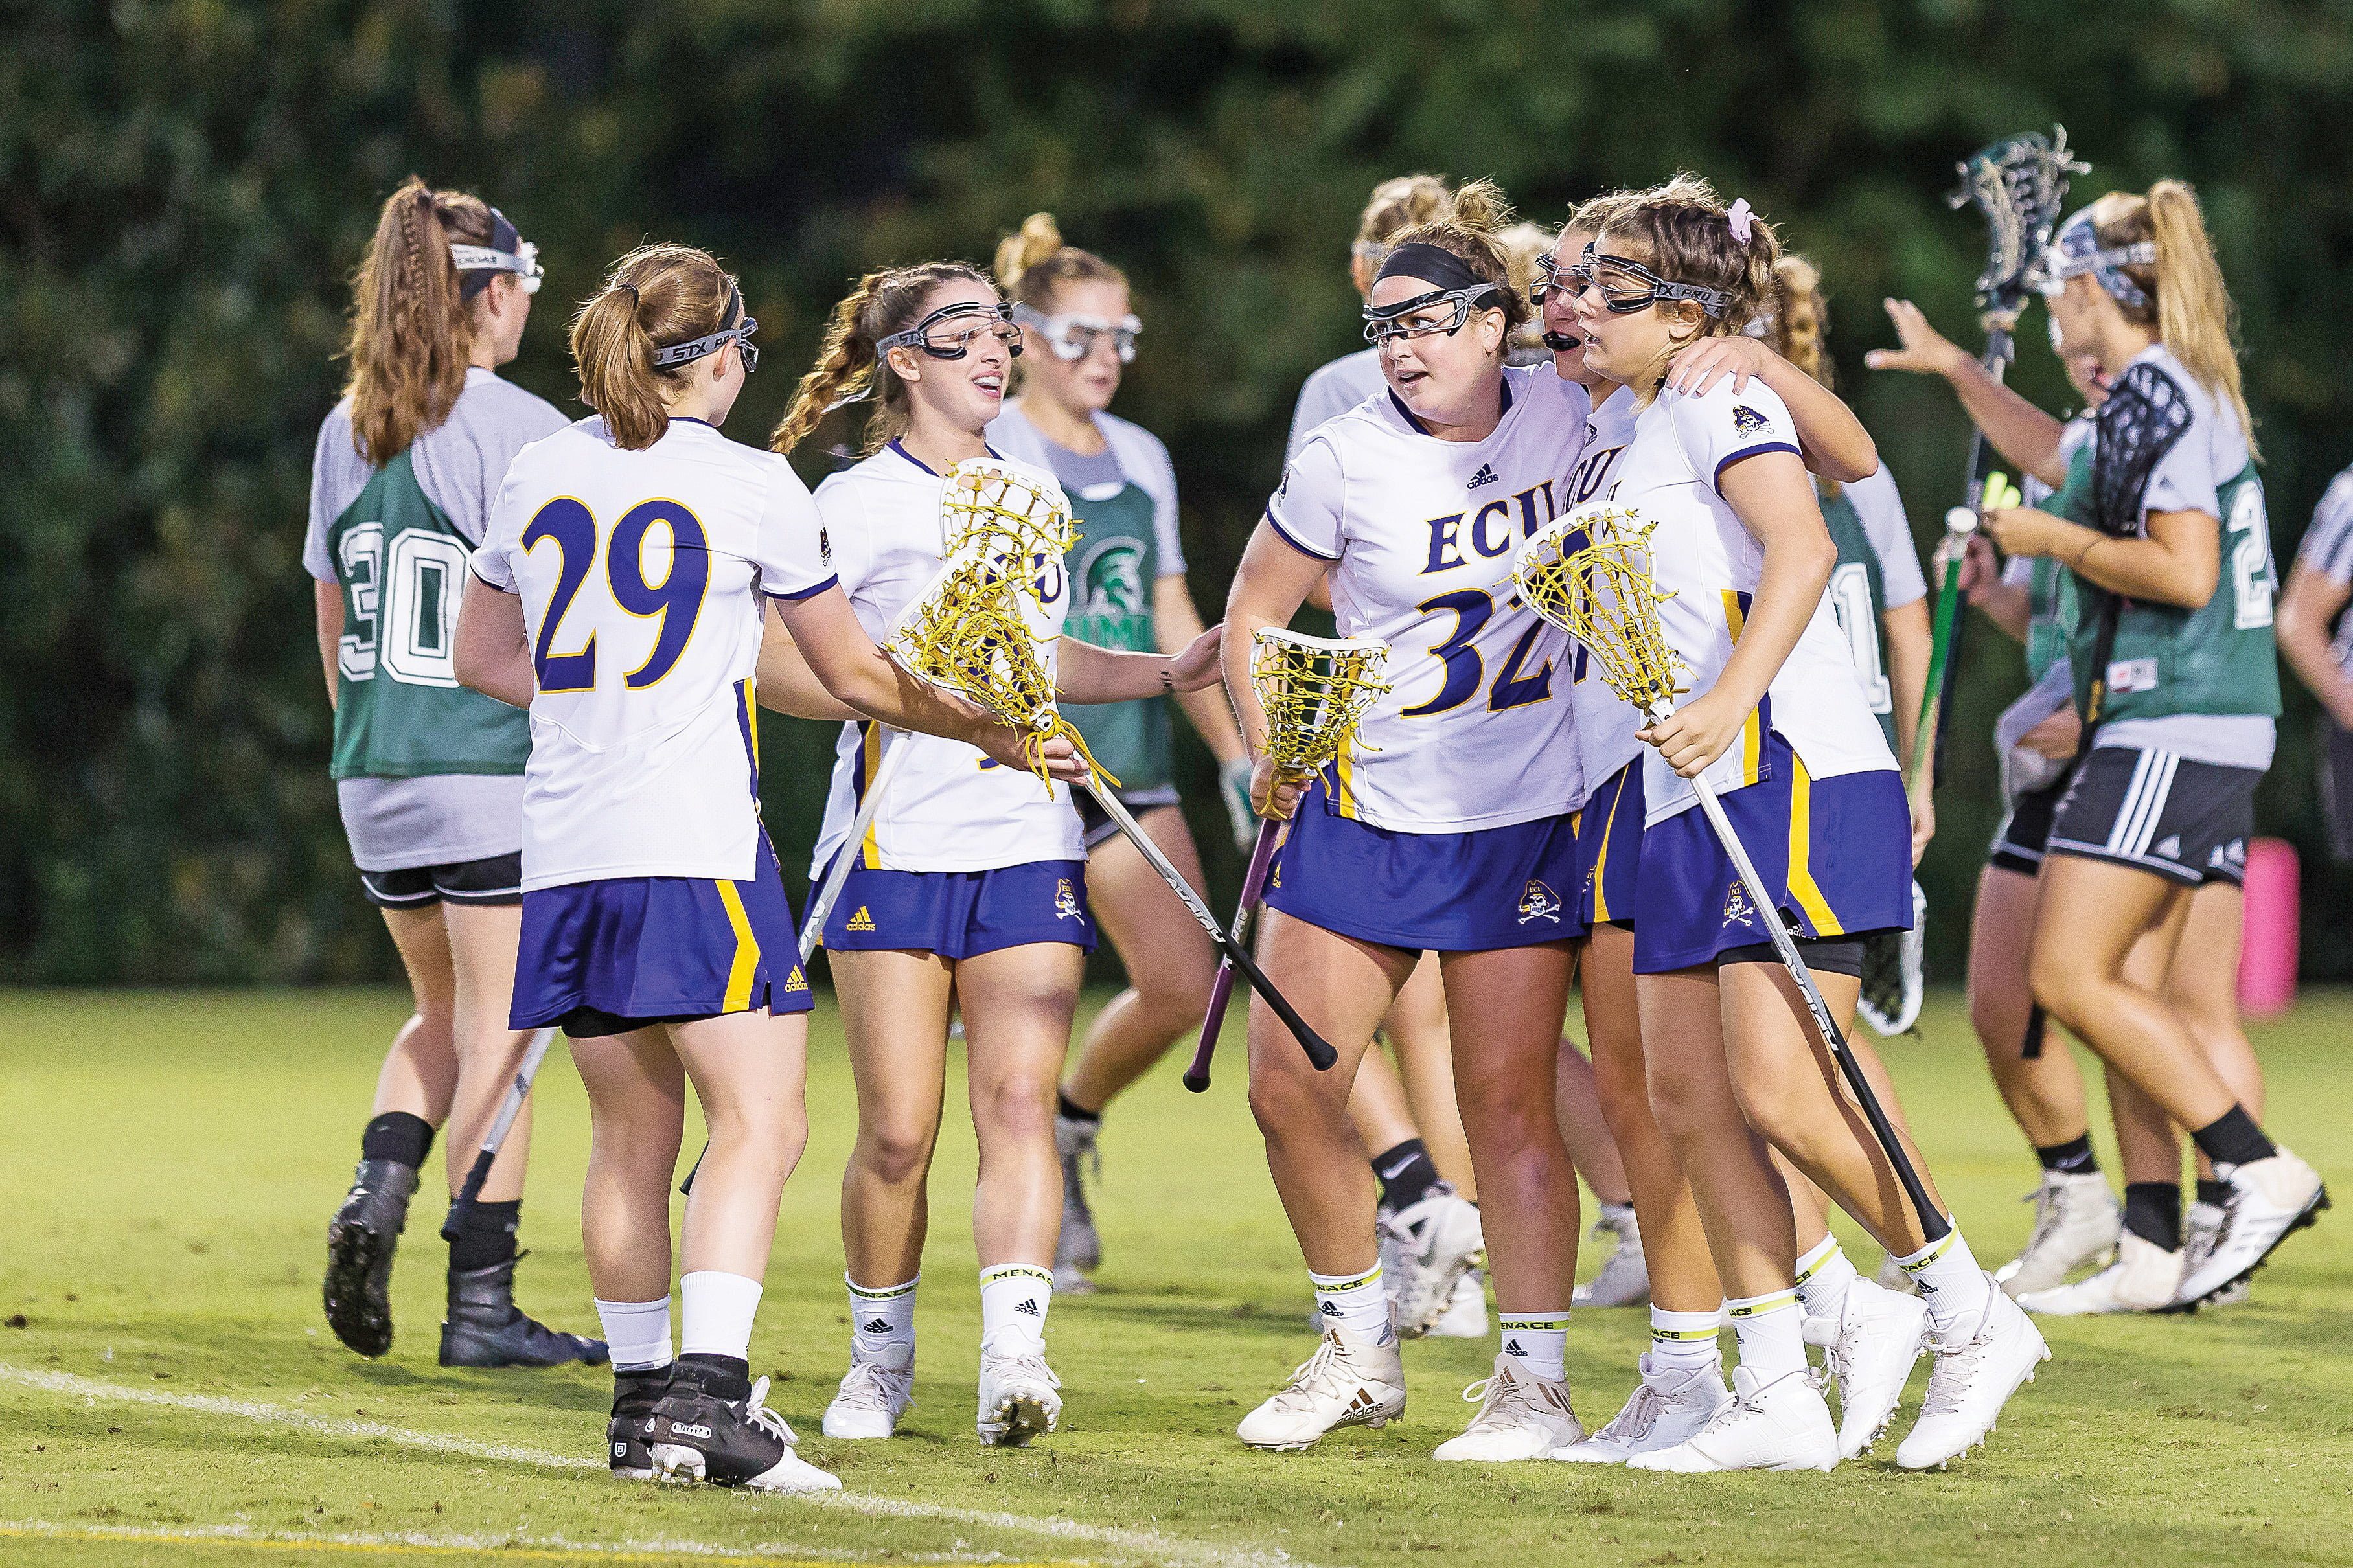 ECU women’s lacrosse launches this weekend – The North State Journal